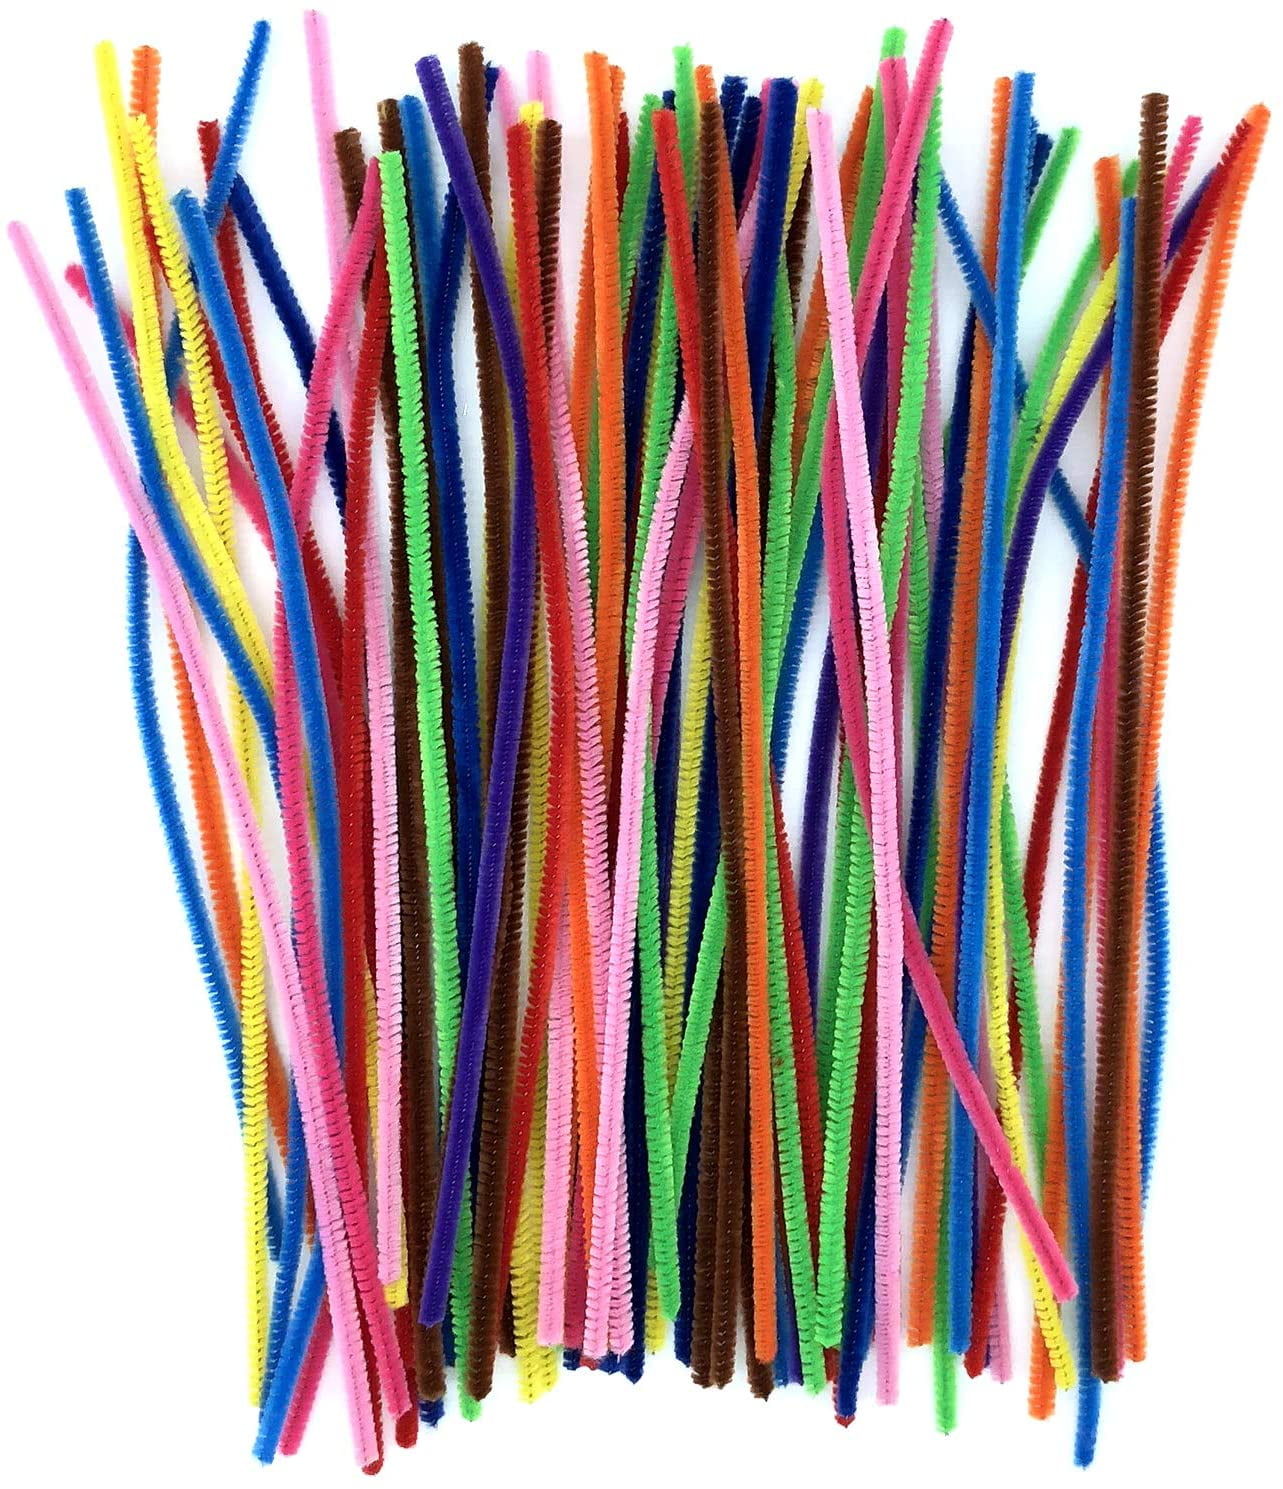 WEKNOWU 200 Pieces Pipe Cleaners Assorted Colors Chenille Stems for Valentine Day DIY Art Creative Crafts Decorations 